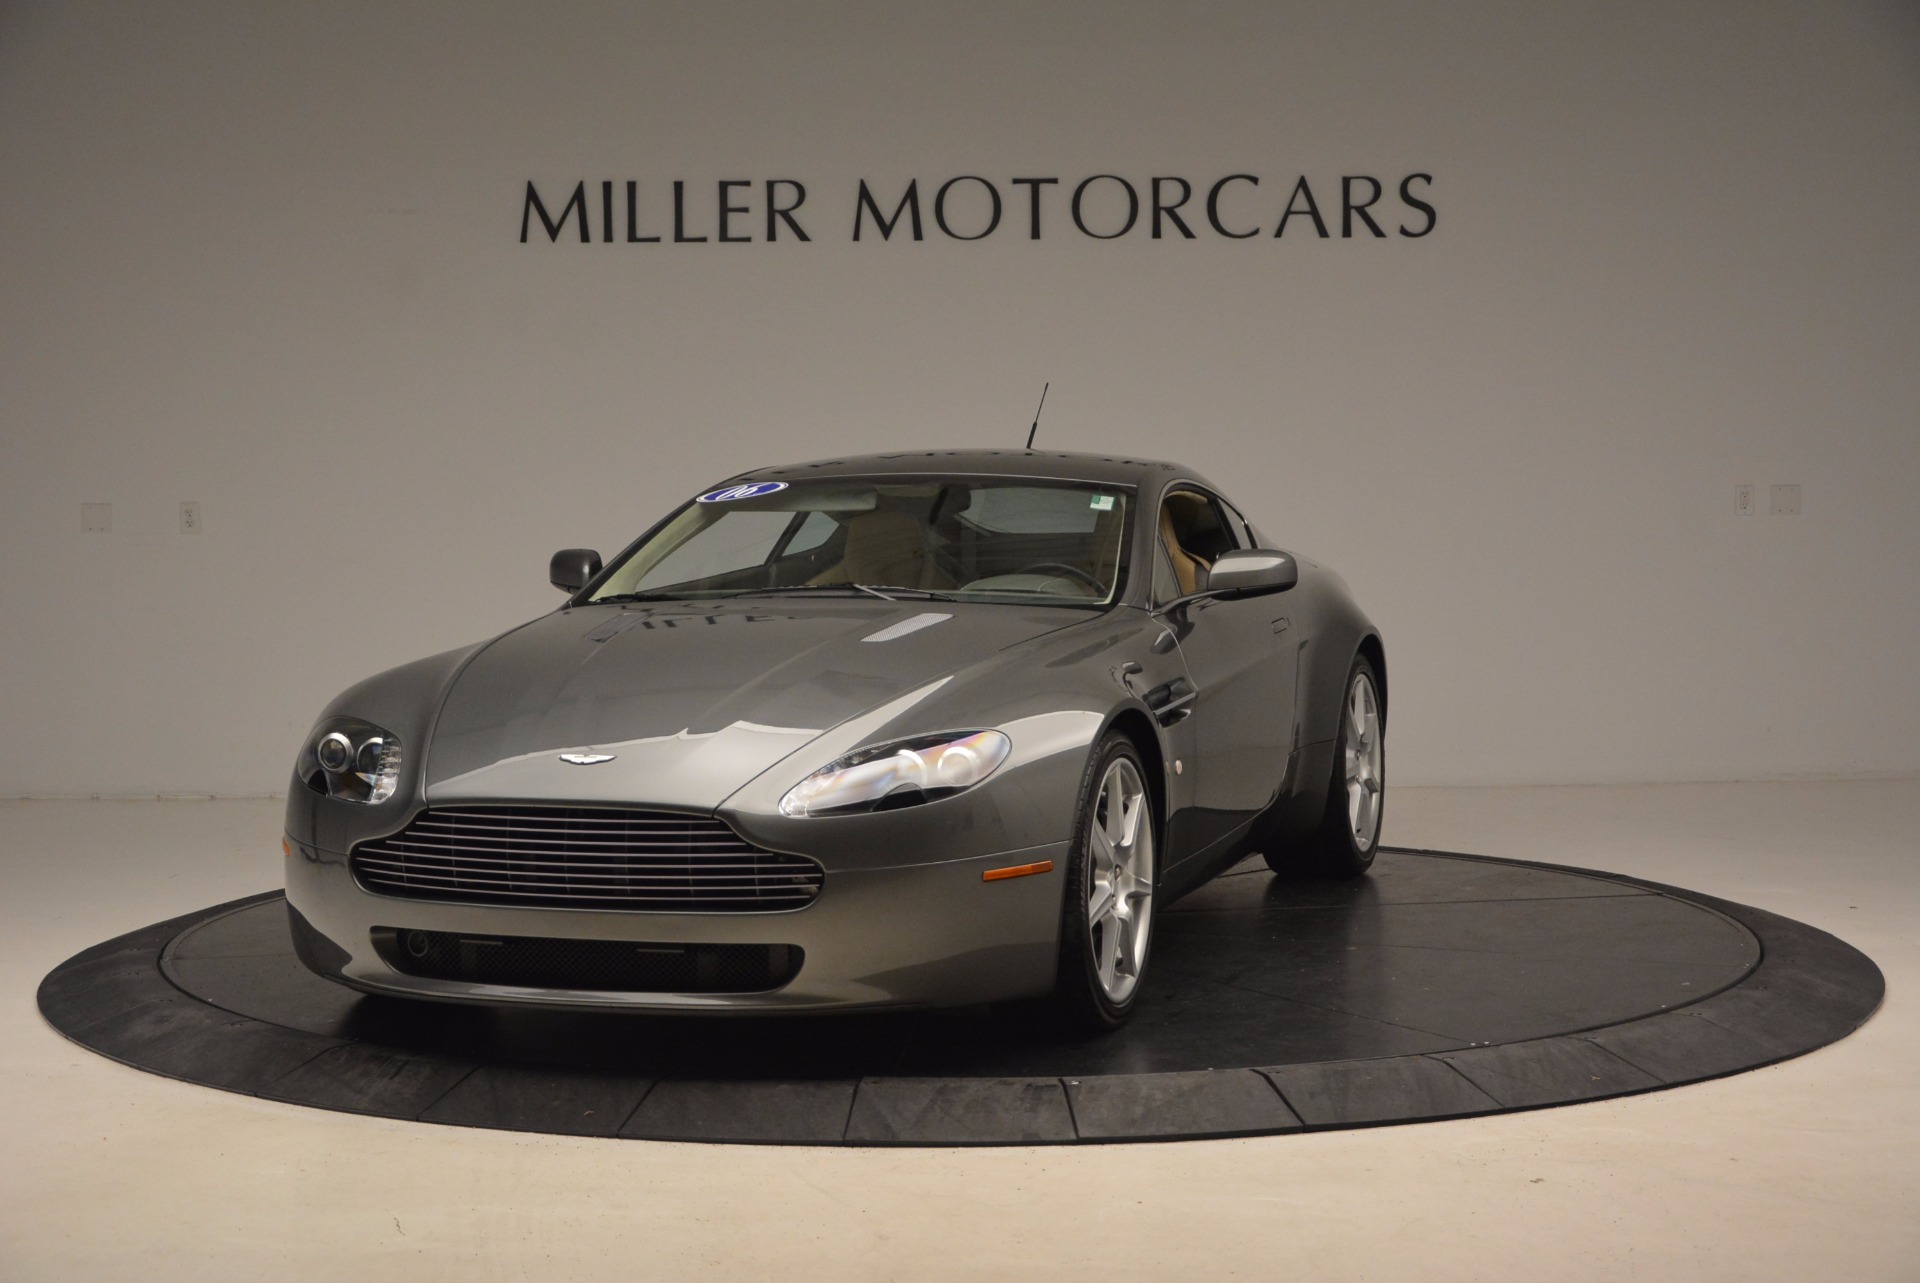 Used 2006 Aston Martin V8 Vantage for sale Sold at Pagani of Greenwich in Greenwich CT 06830 1